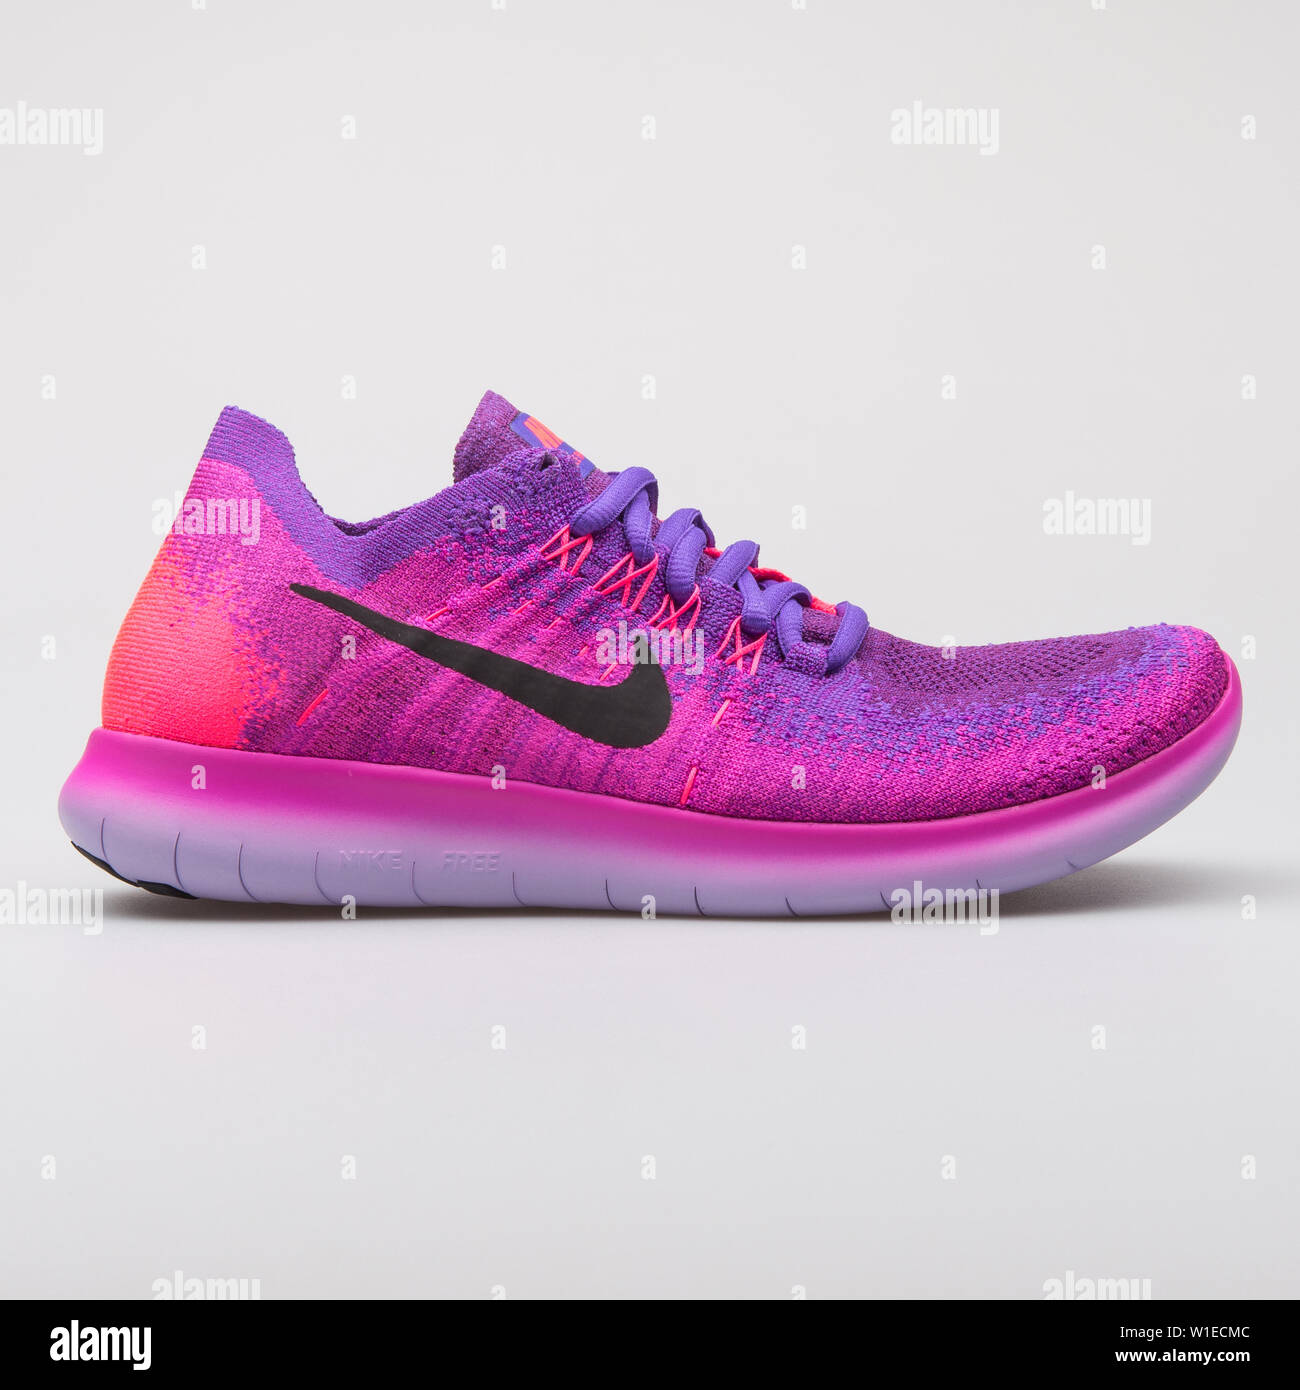 VIENNA, AUSTRIA - AUGUST 7, 2017: Nike Free RN Flyknit 2017 pink and purple  sneaker on white background Stock Photo - Alamy